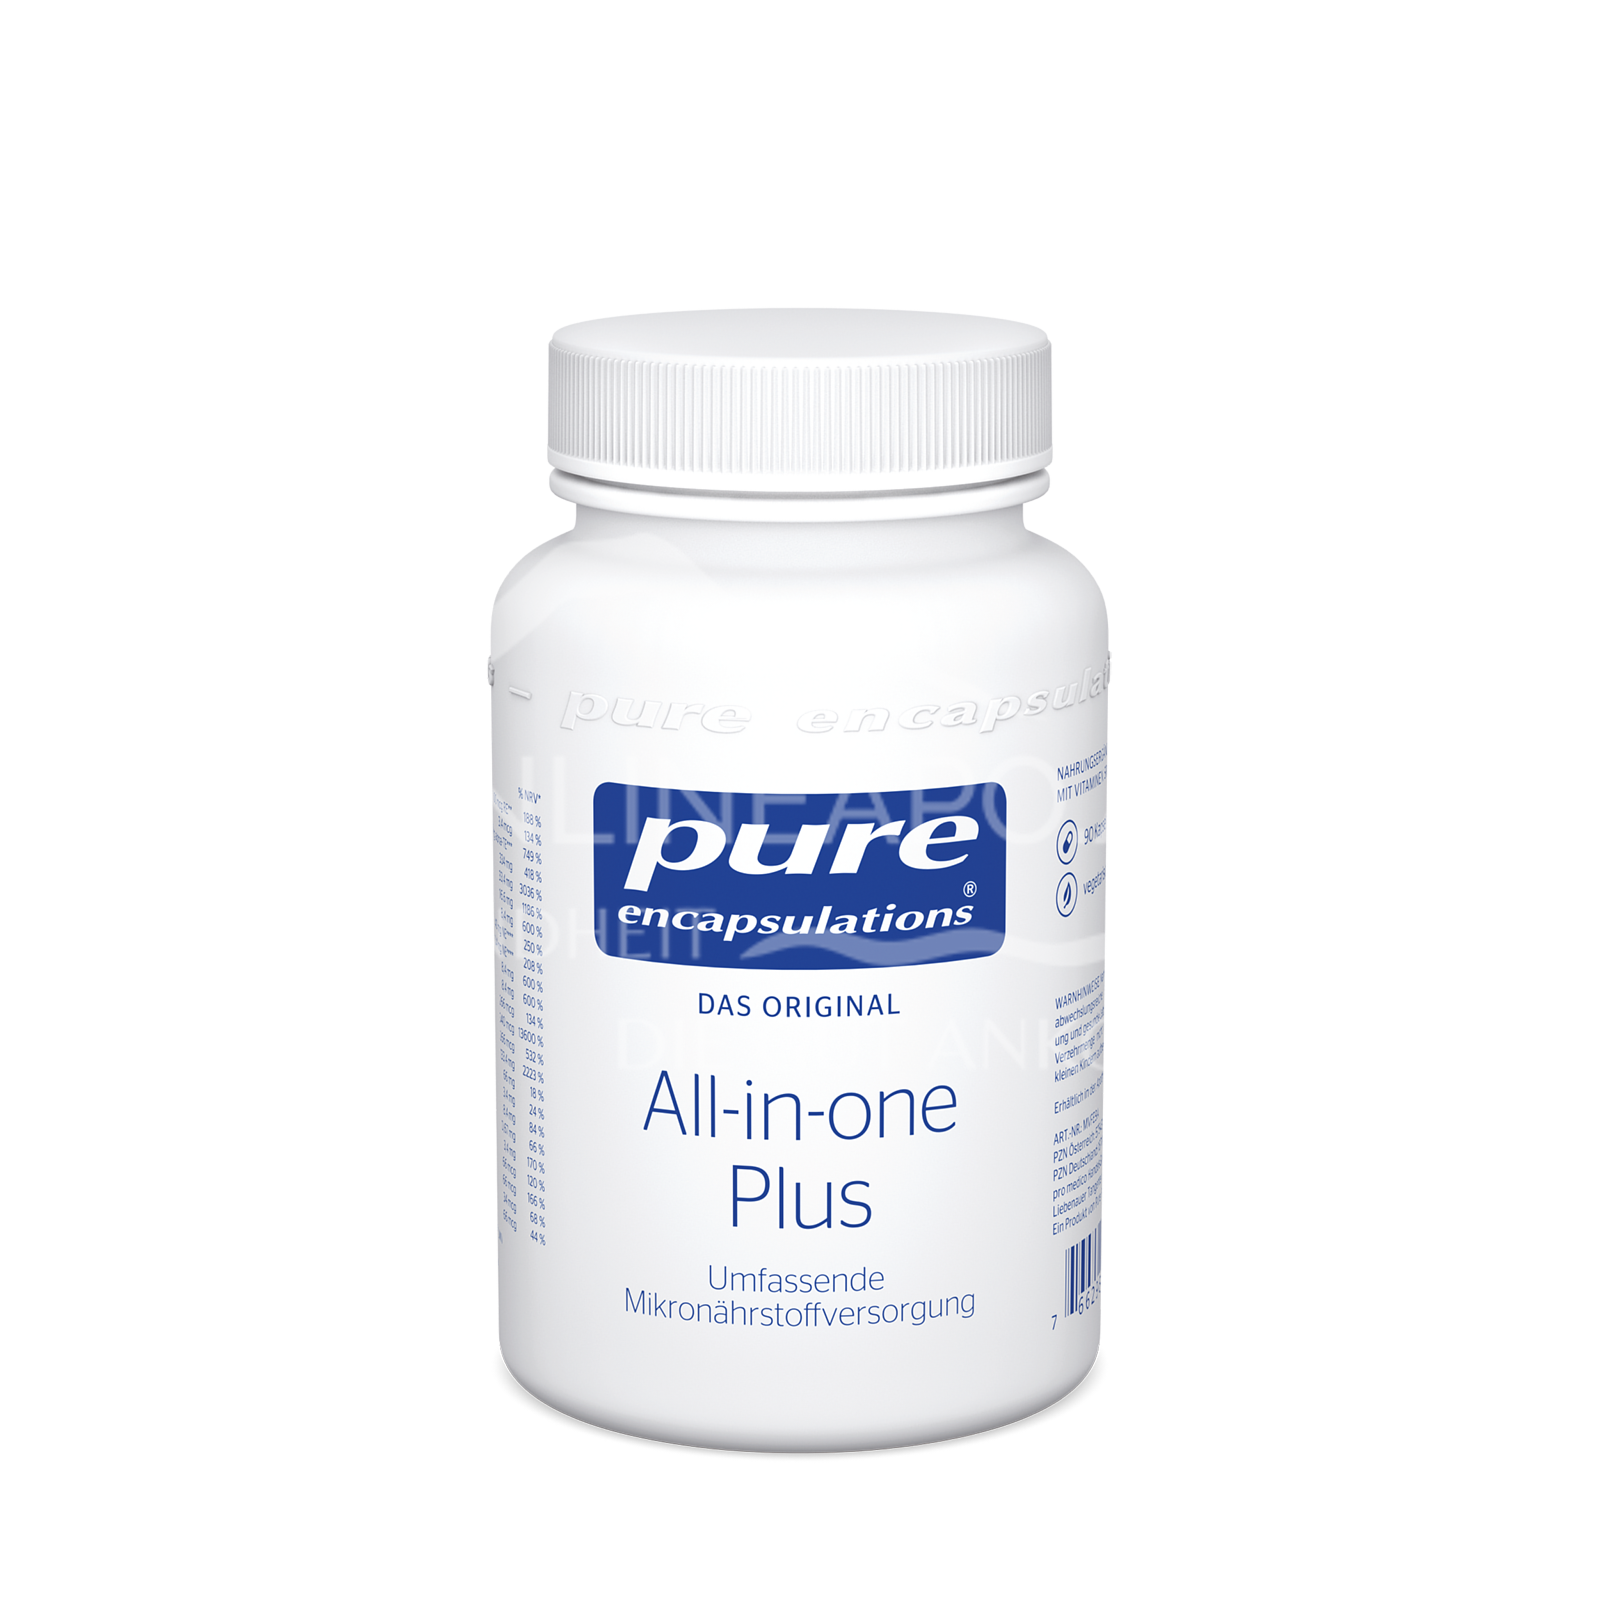 pure encapsulations® All-in-one Plus Kapseln